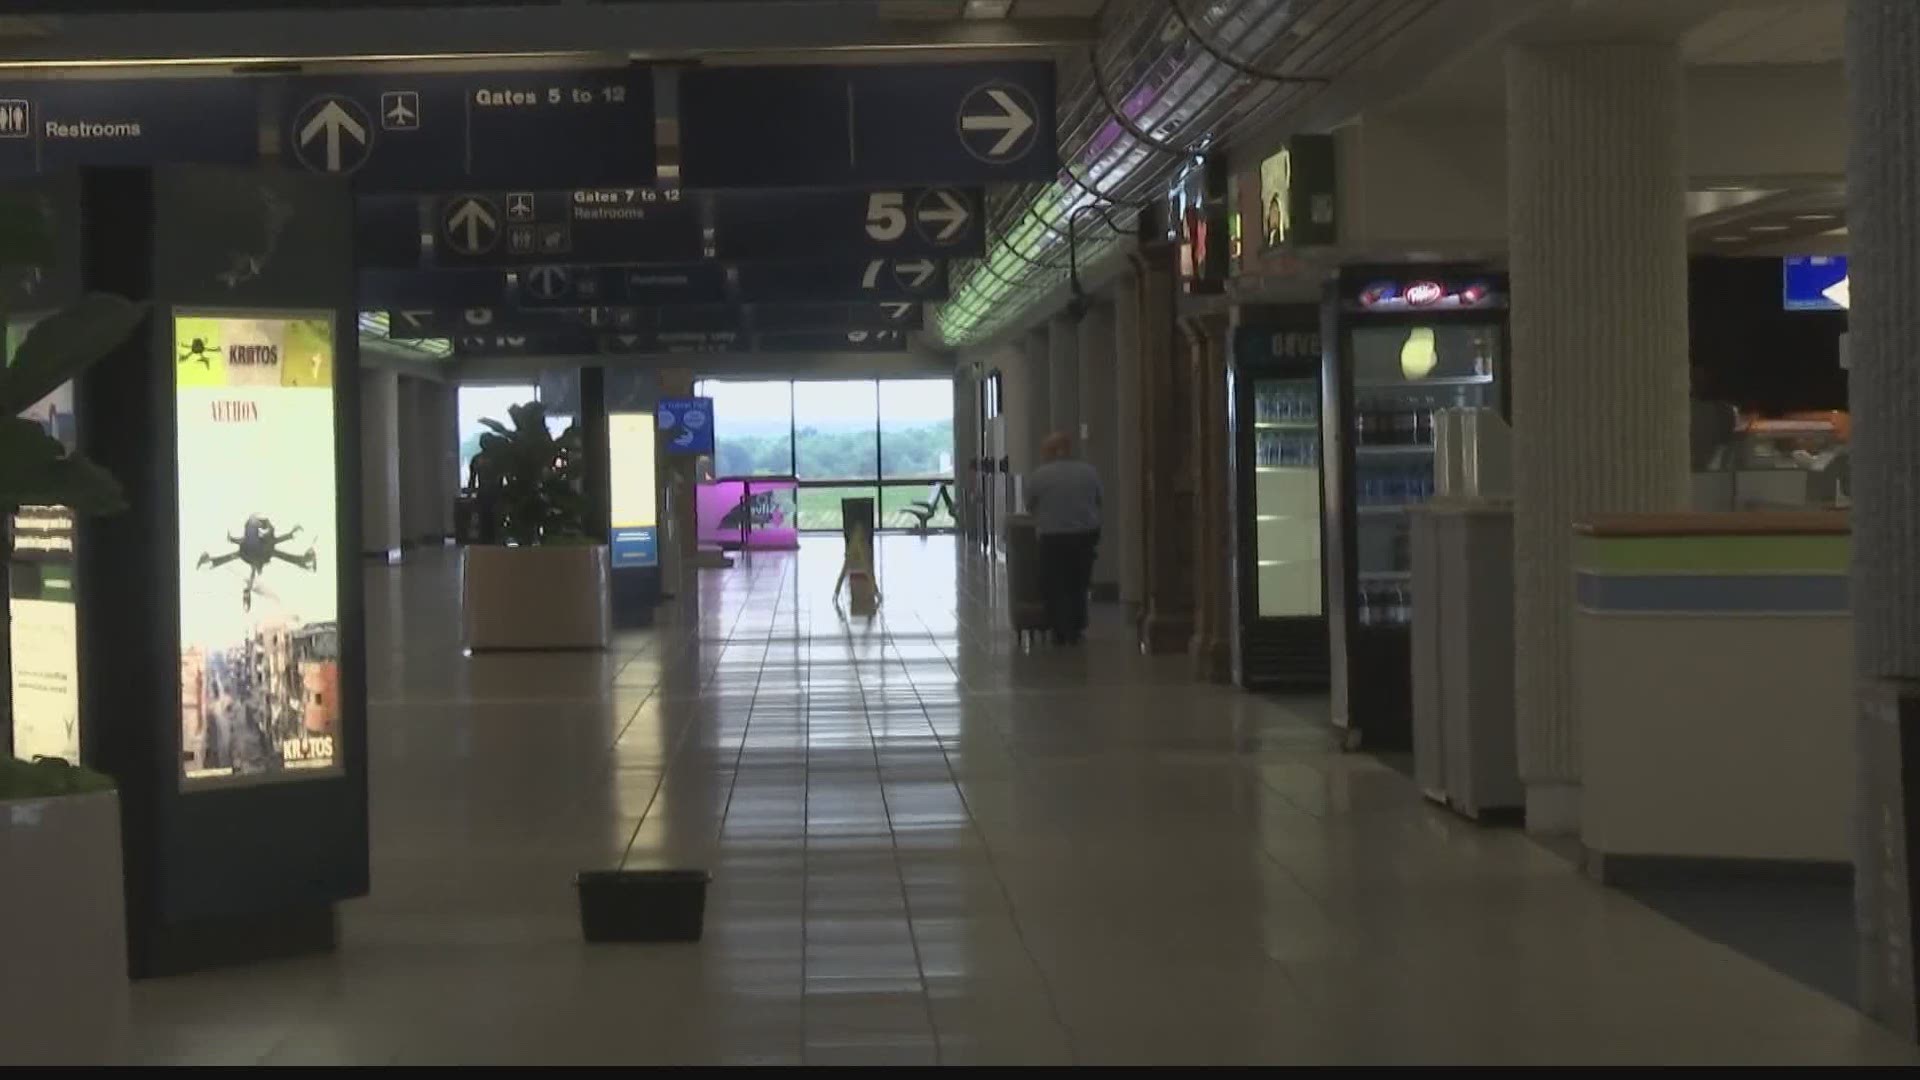 The airport is seeing a fraction of the number of travelers. But, they’re still putting some big changes in place so make sure everyone stays safe.